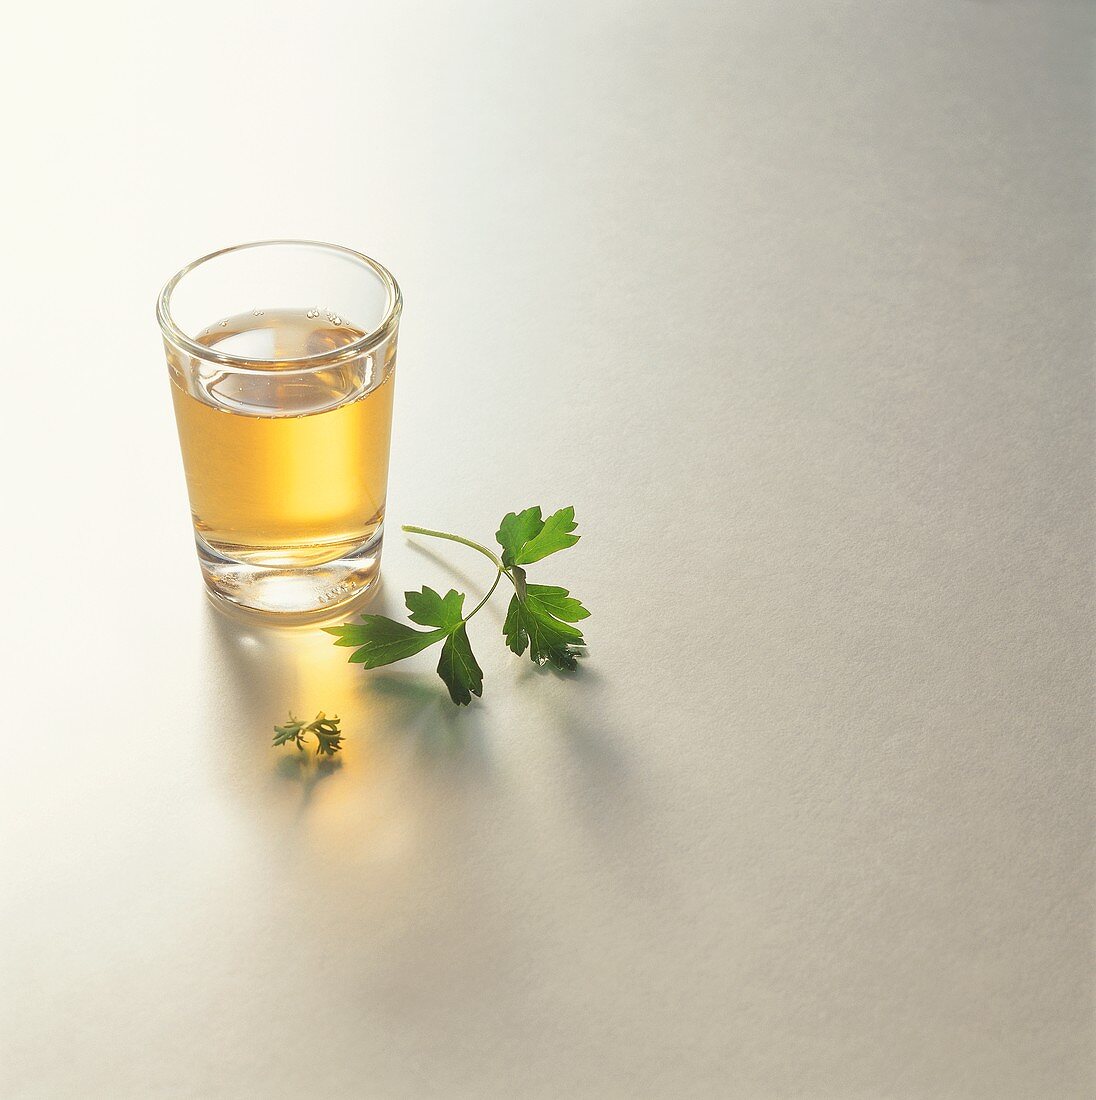 A glass of vinegar and parsley